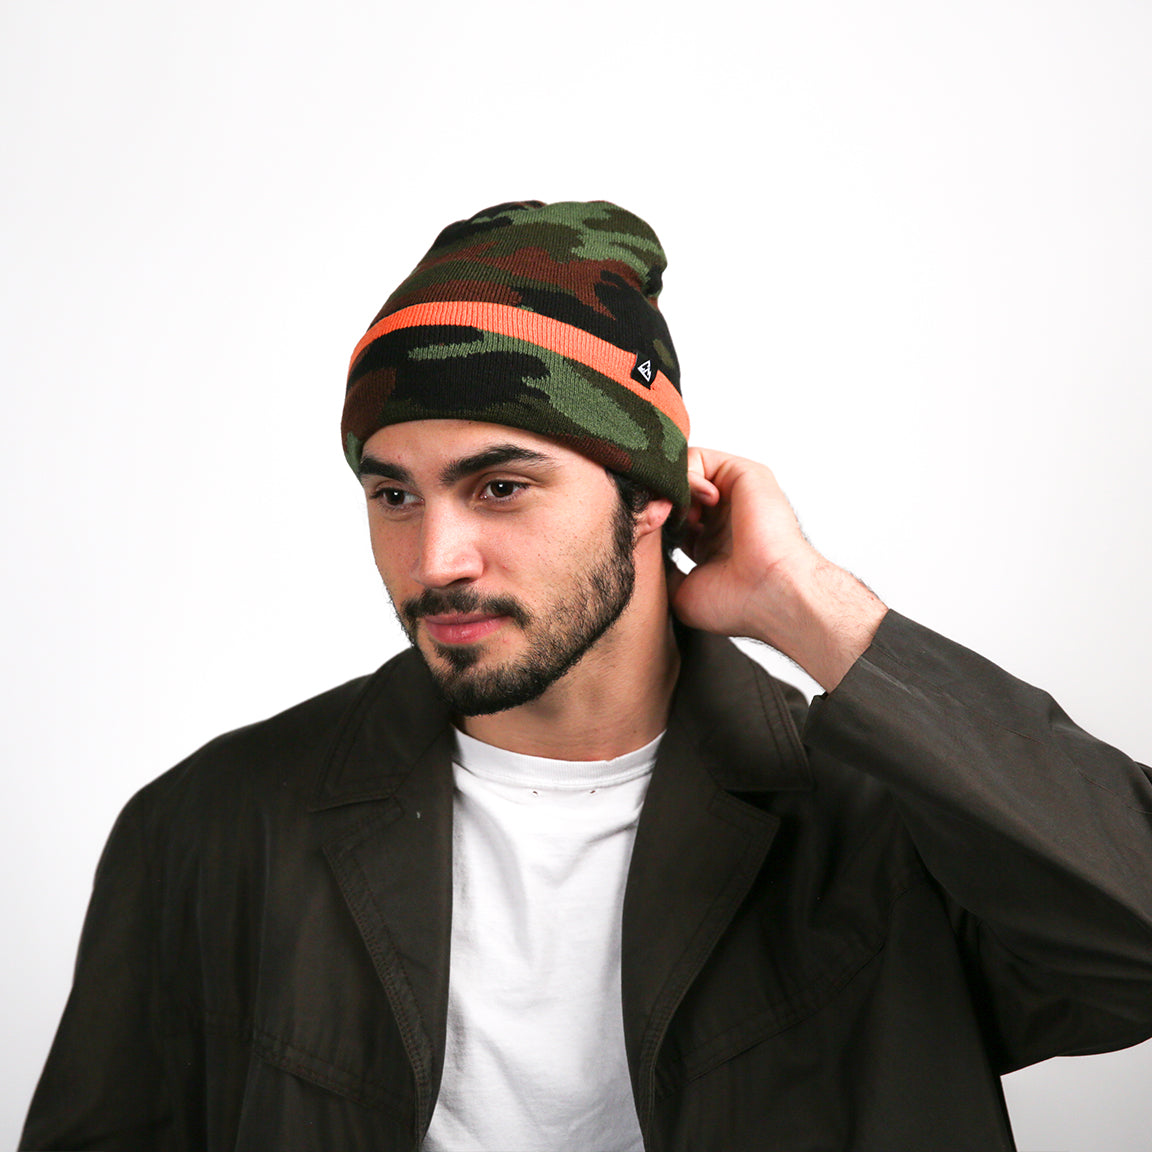 A front-facing view of a beanie with a green, brown, and black camouflage pattern. It features a bright orange stripe and a small black triangular logo near the edge. The beanie is worn loosely, creating a slight slouch at the back.